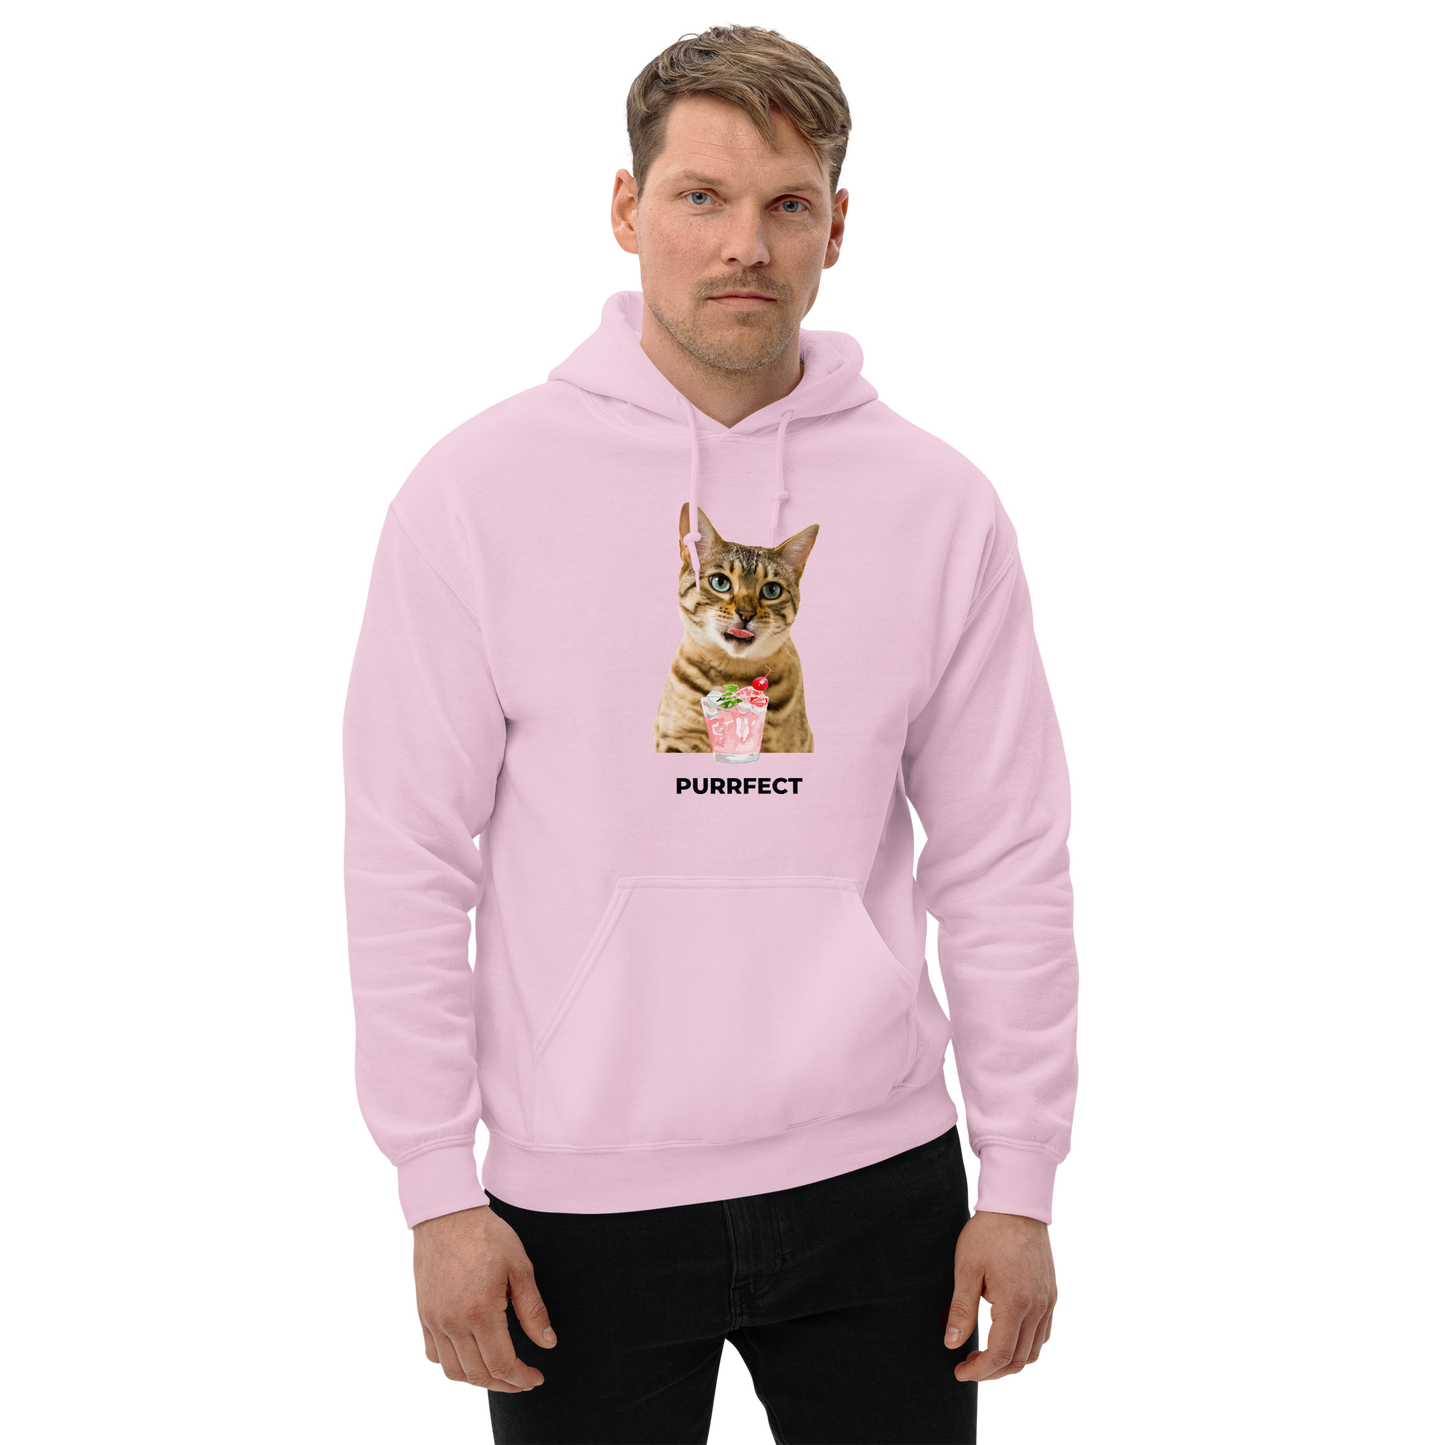 Man Wearing a Light Pink Cat Hoodie featuring an adorable Purrfect graphic on the chest - Funny Graphic Cat Hoodies - Boozy Fox